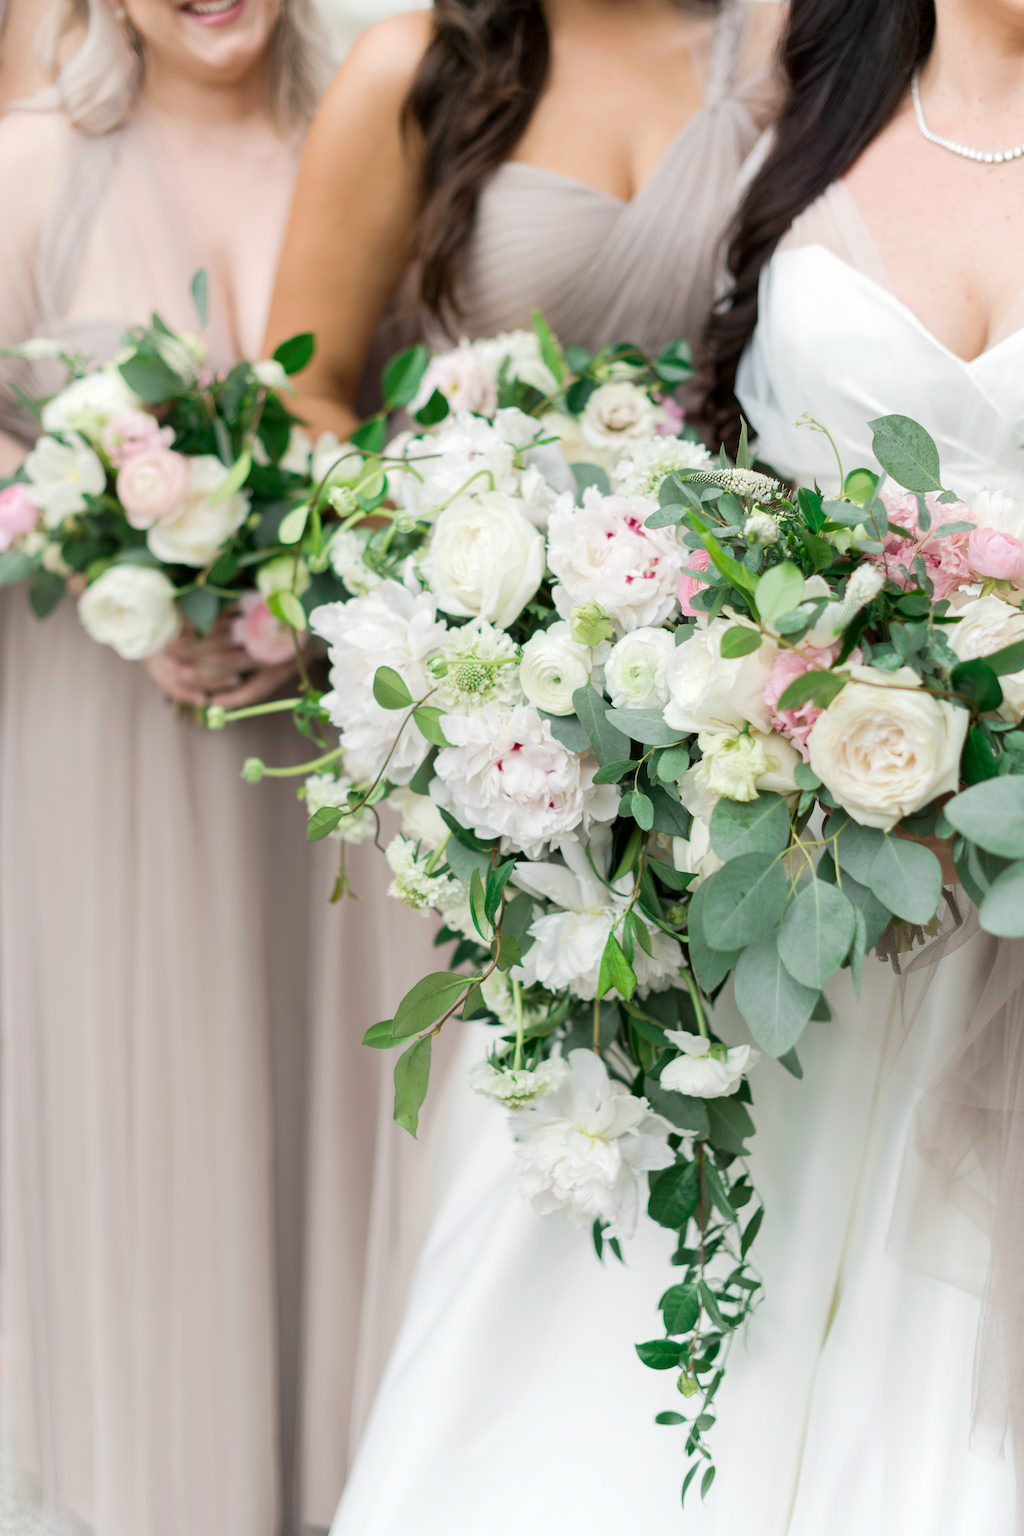 Florida Bride and Bridesmaids Wedding Portrait, Bridesmaids in Mismatched Style Jenny Yoo Long Taupe Dresses with Organic Ivory, Blush Pink and Greenery Floral Bouquets